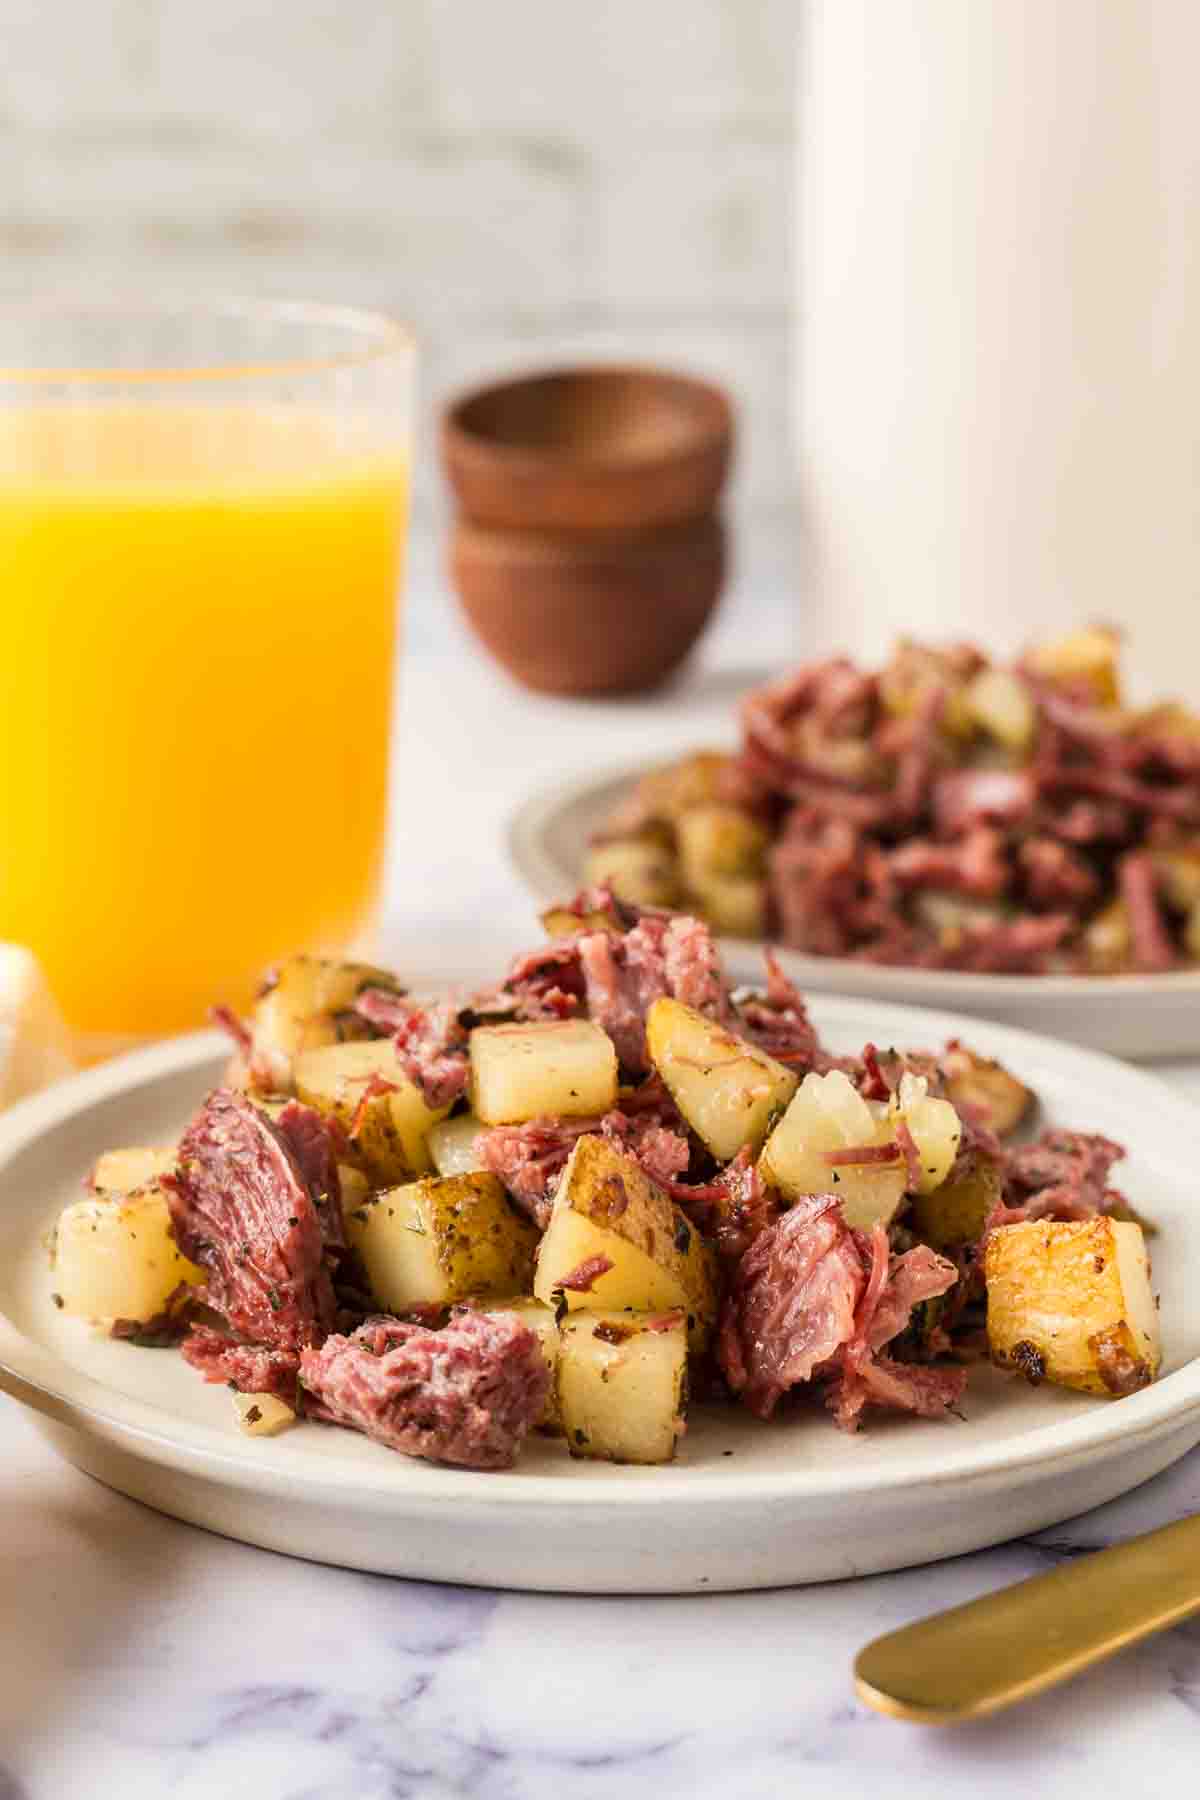 Corned beef hash served on a white plate with orange juice in a glass. 